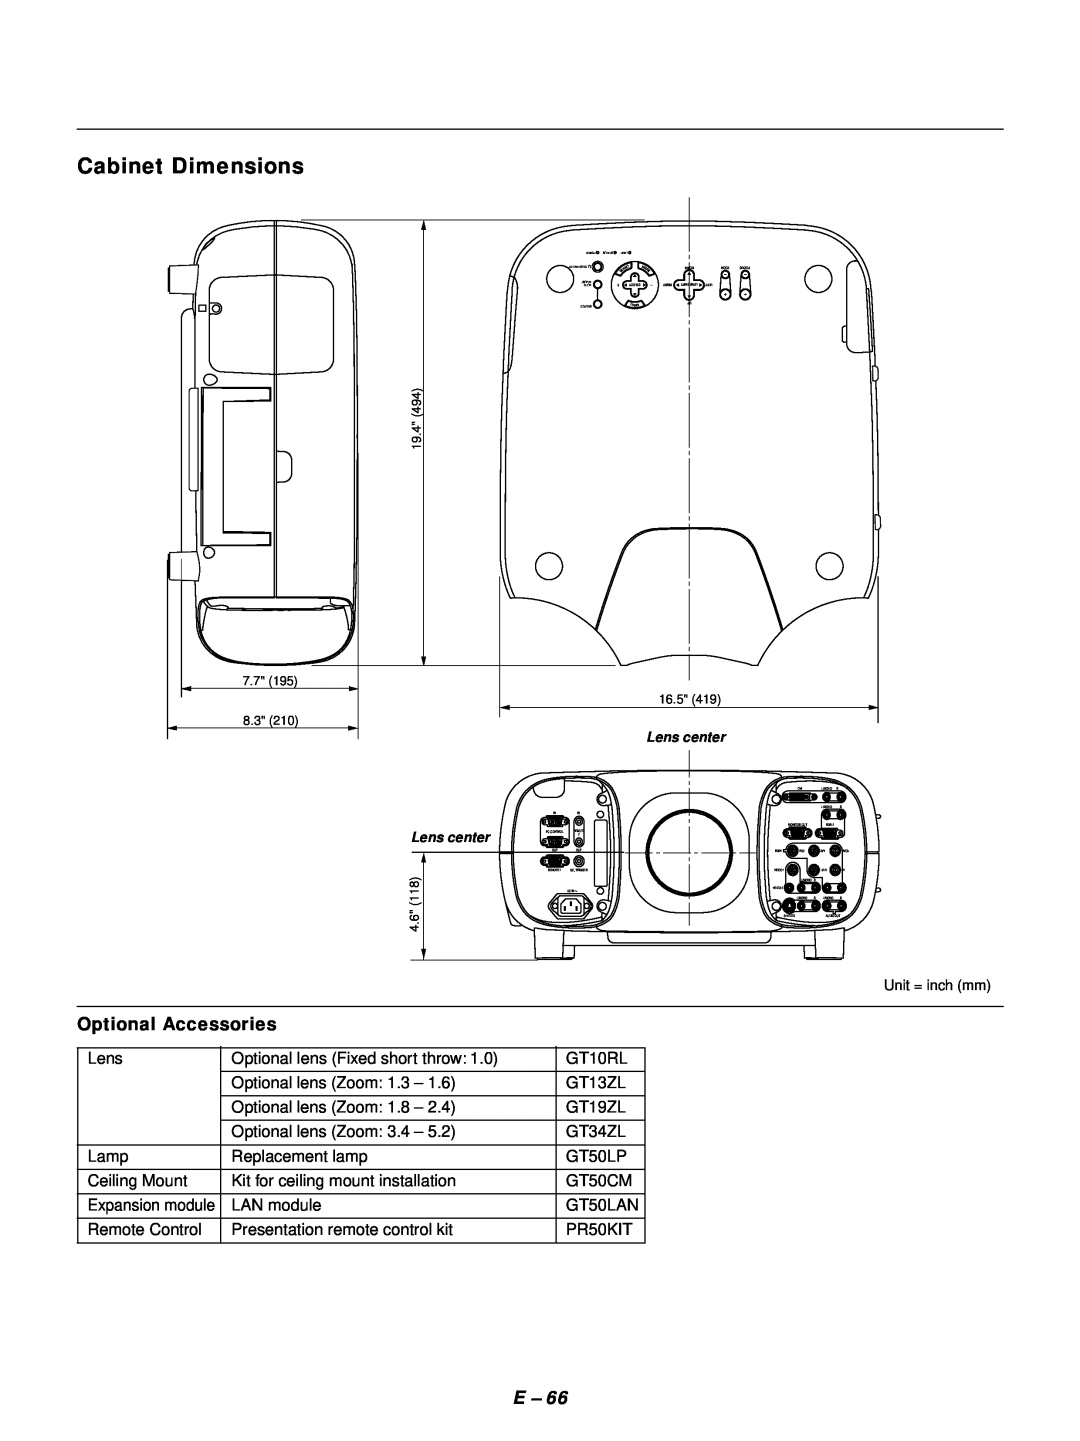 NEC GT1150 user manual Cabinet Dimensions, Optional Accessories 